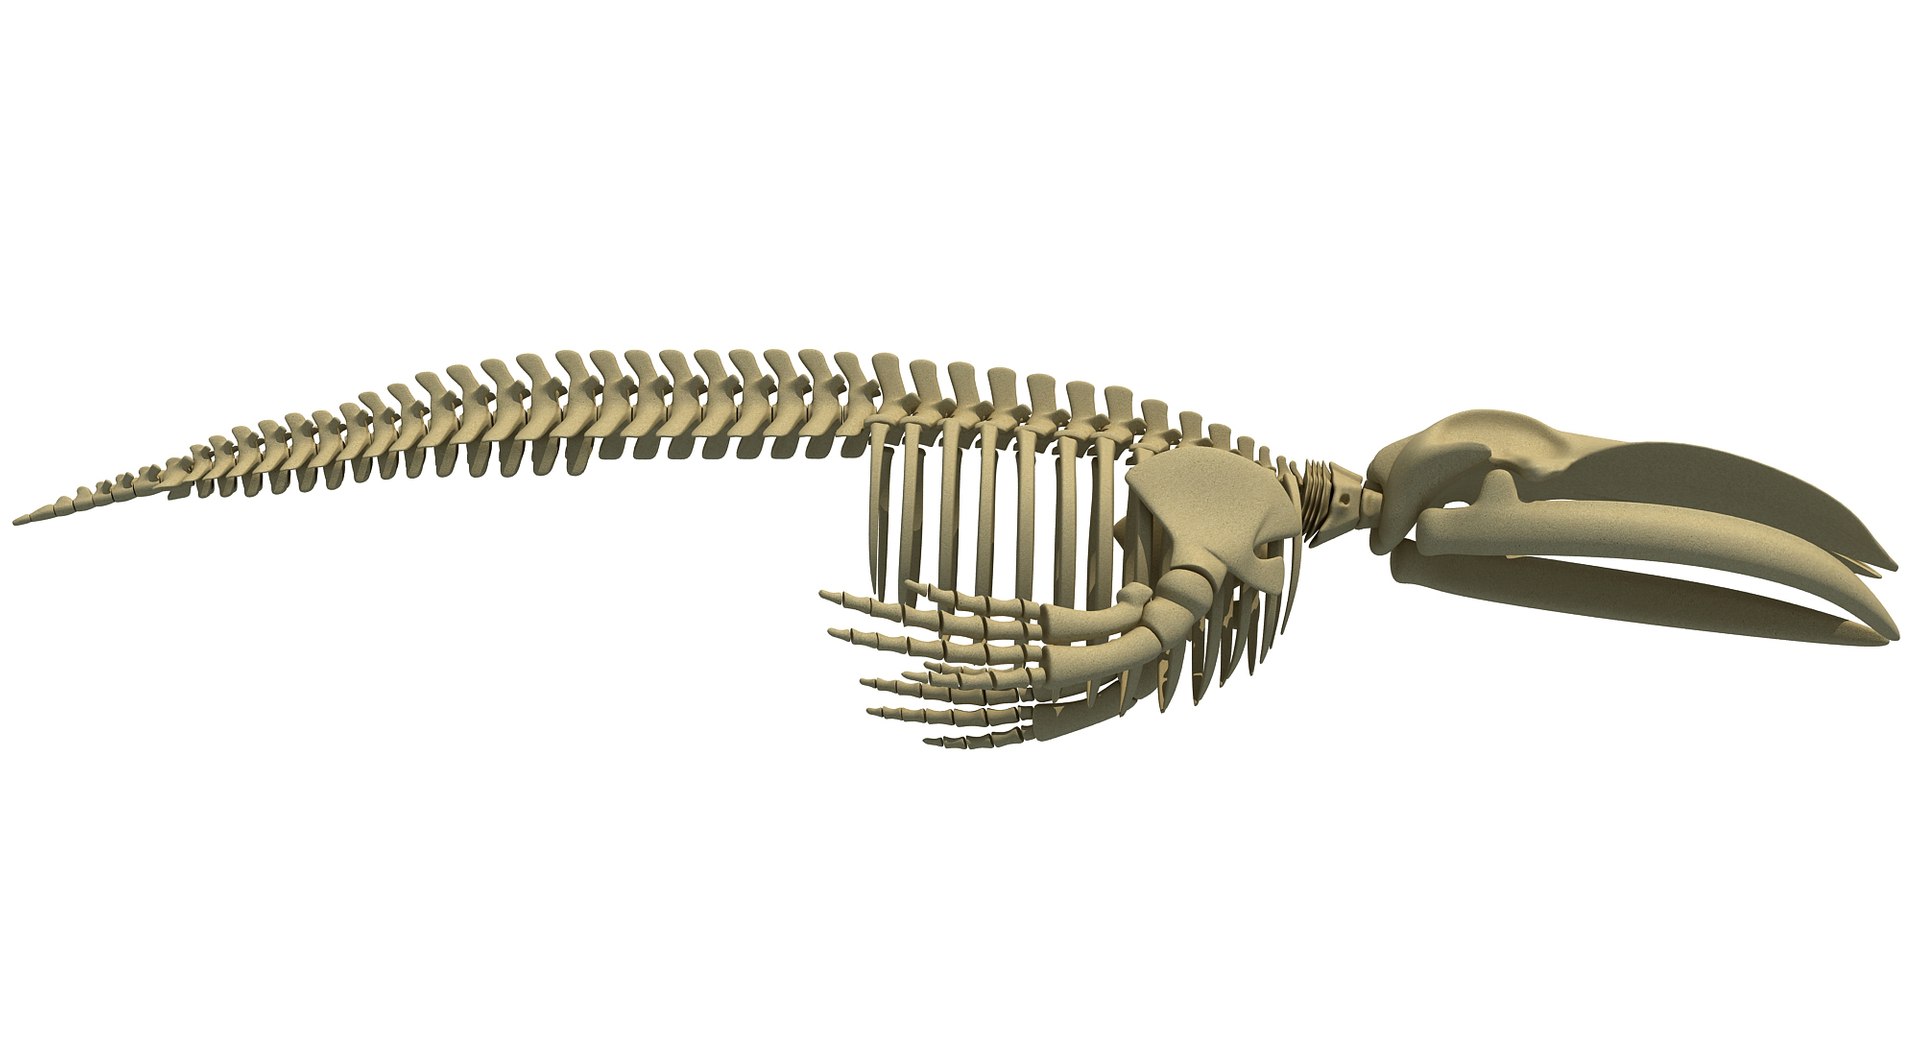 3,537 Whale Skeleton Images, Stock Photos, 3D objects, & Vectors